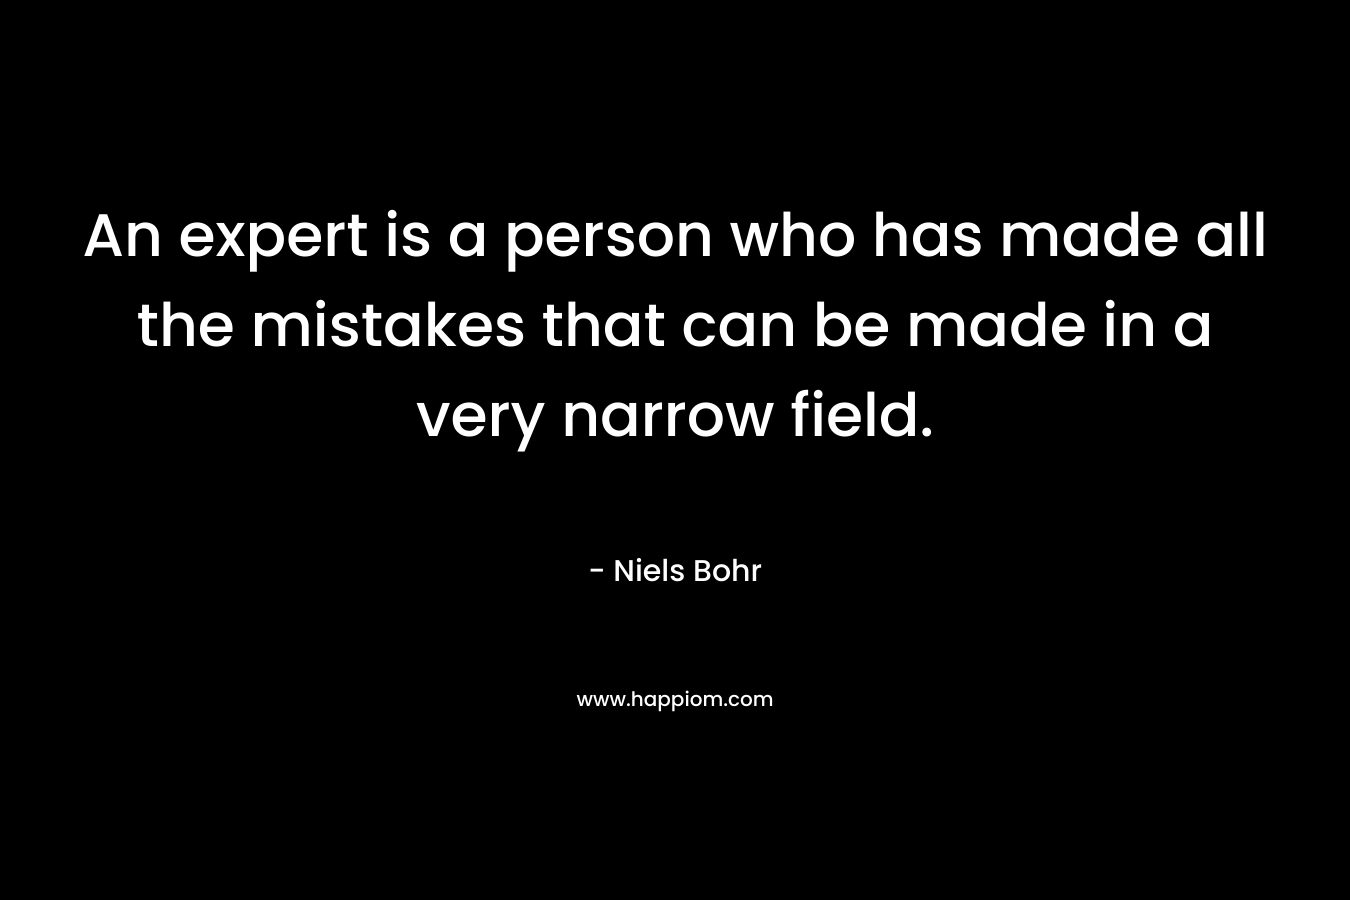 An expert is a person who has made all the mistakes that can be made in a very narrow field.